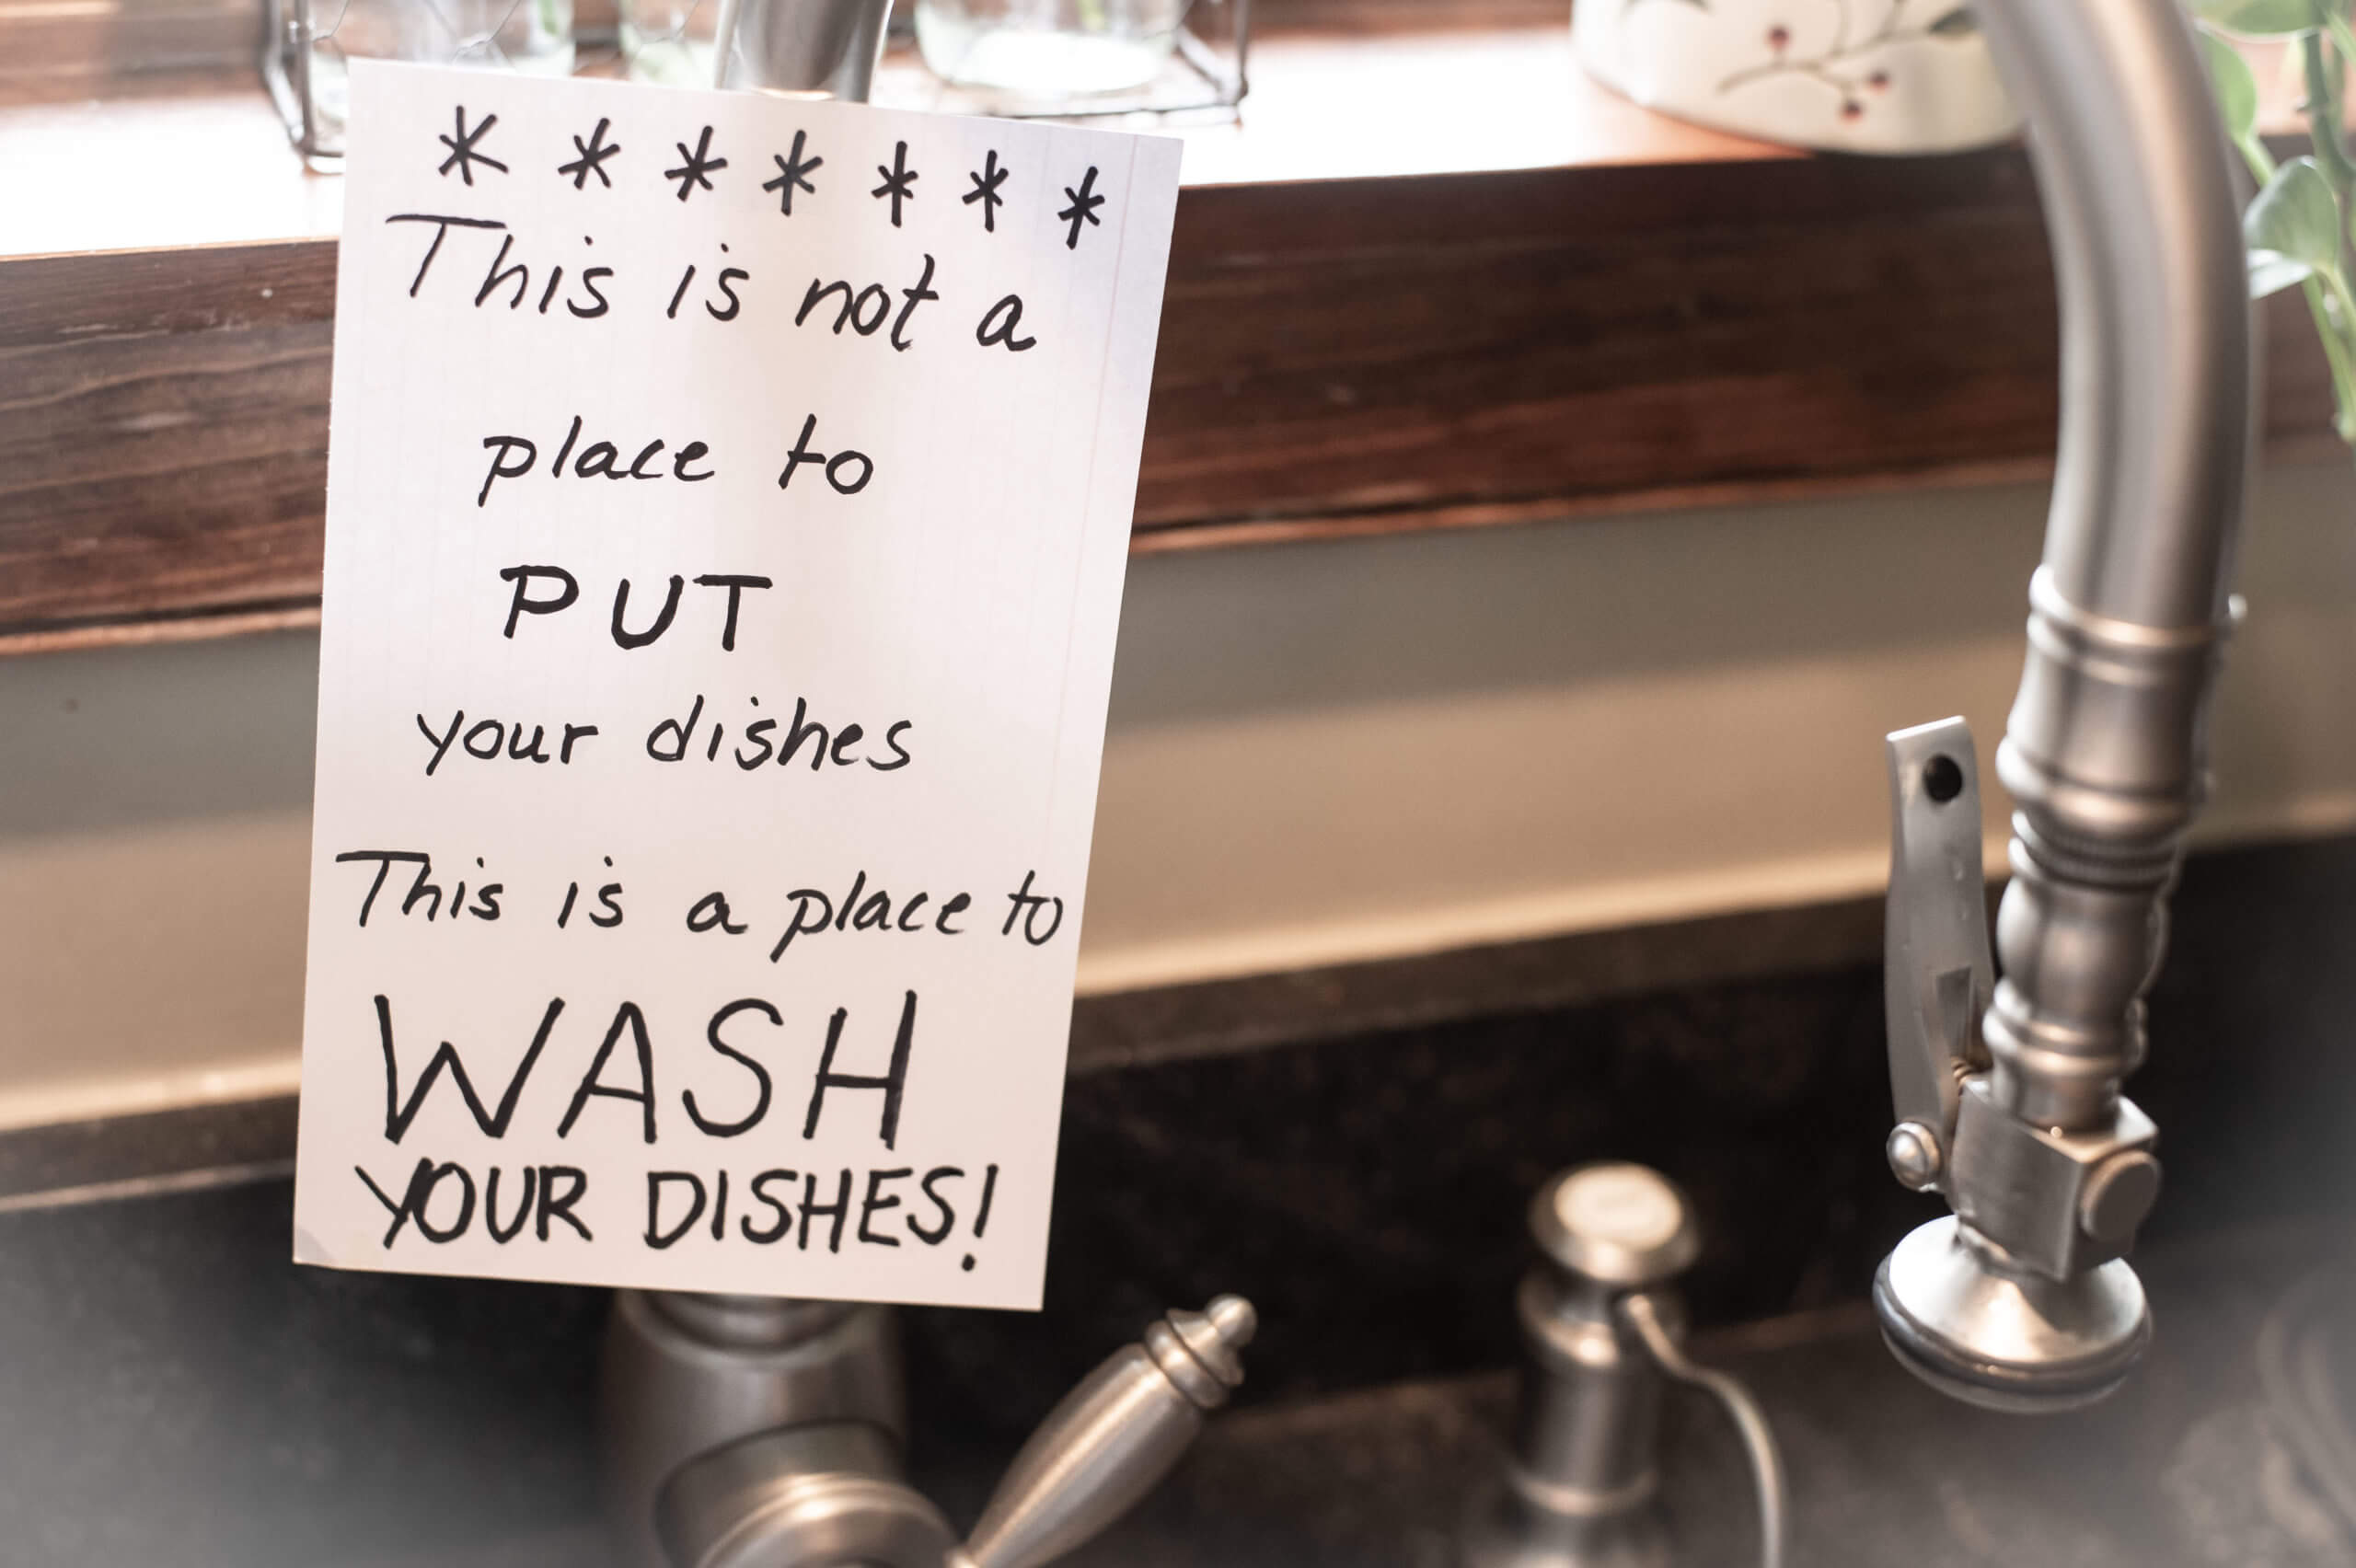 Sign taped to kitchen sink that reads, "This is not a place to PUT your dishes, this is a place to WASH YOUR DISHES"